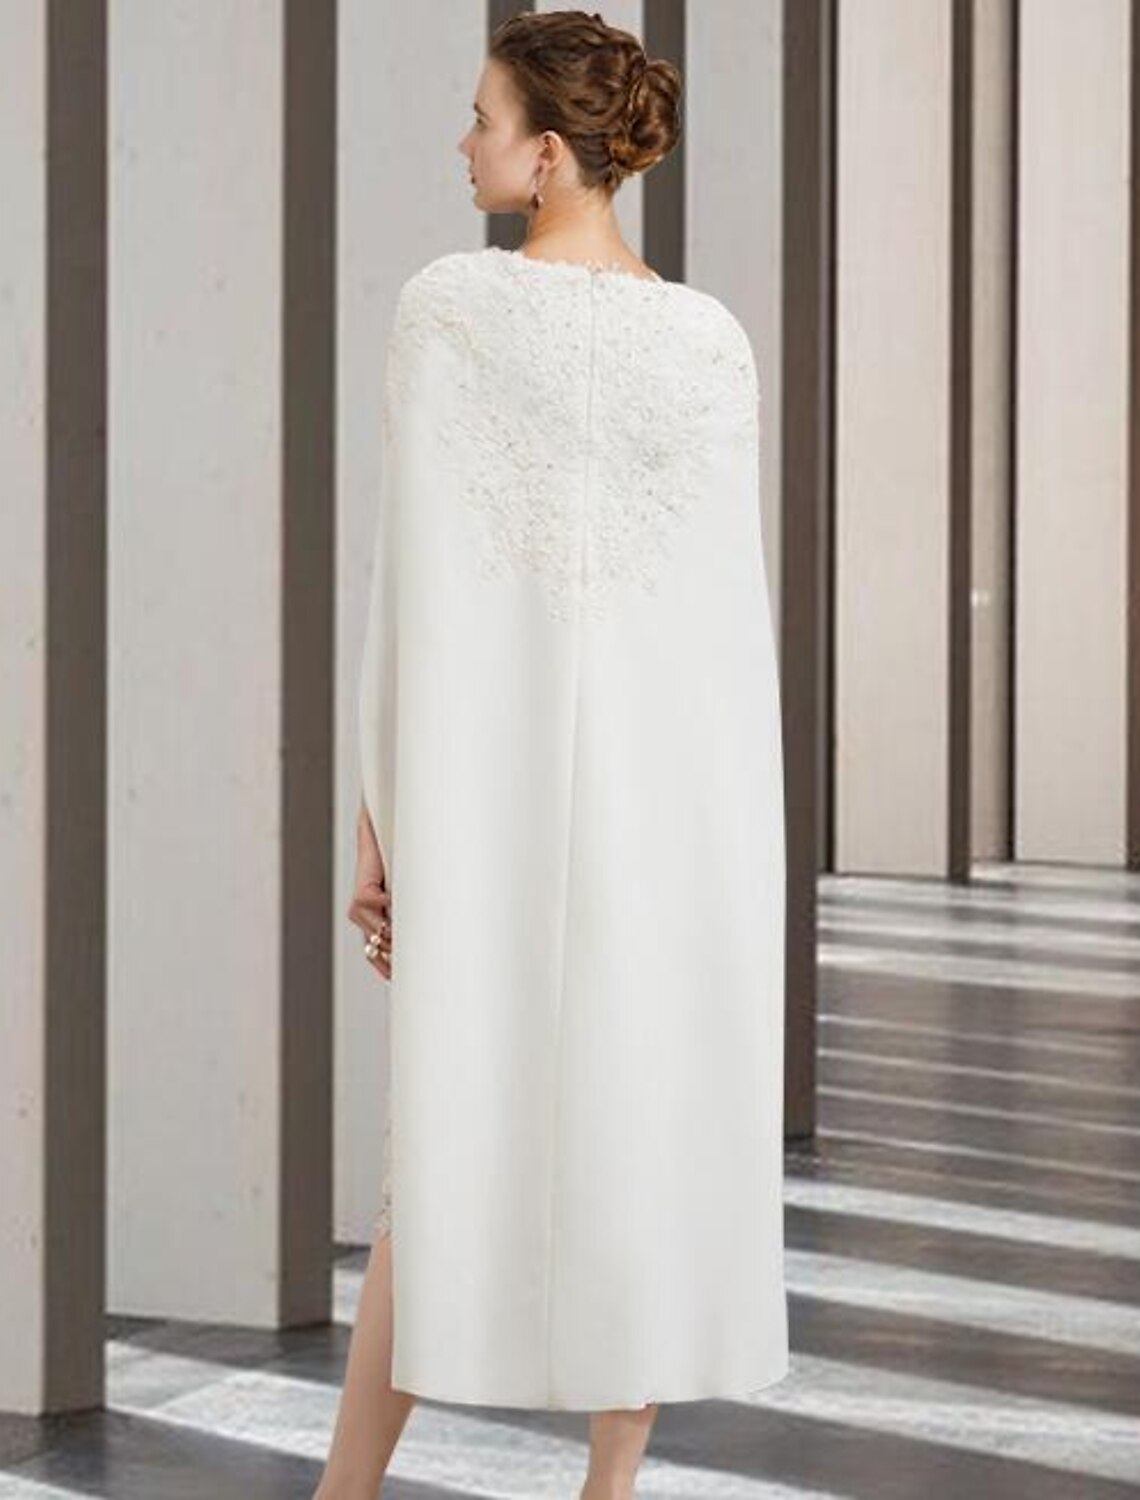 Two Piece Sheath / Column Mother of the Bride Dress Wedding Guest Church Elegant Jewel Neck Knee Length Chiffon Lace Sleeveless with Beading Appliques Fall